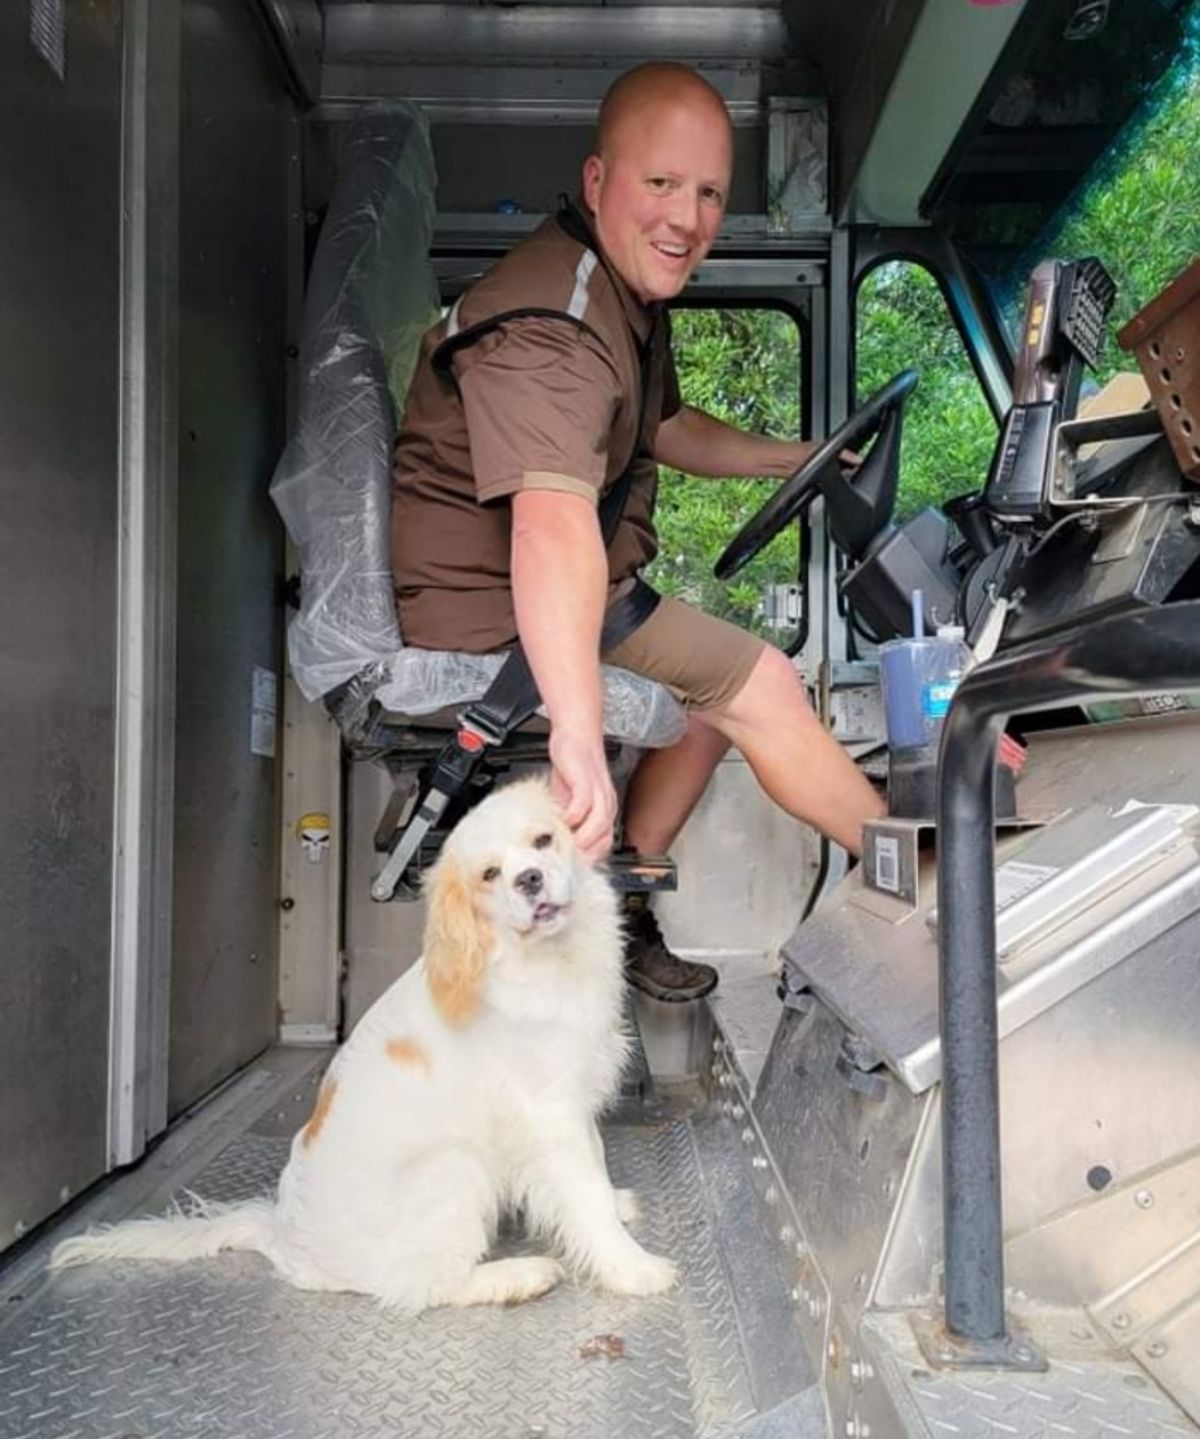 male ups driver in the truck with a white and brown fluffy dog